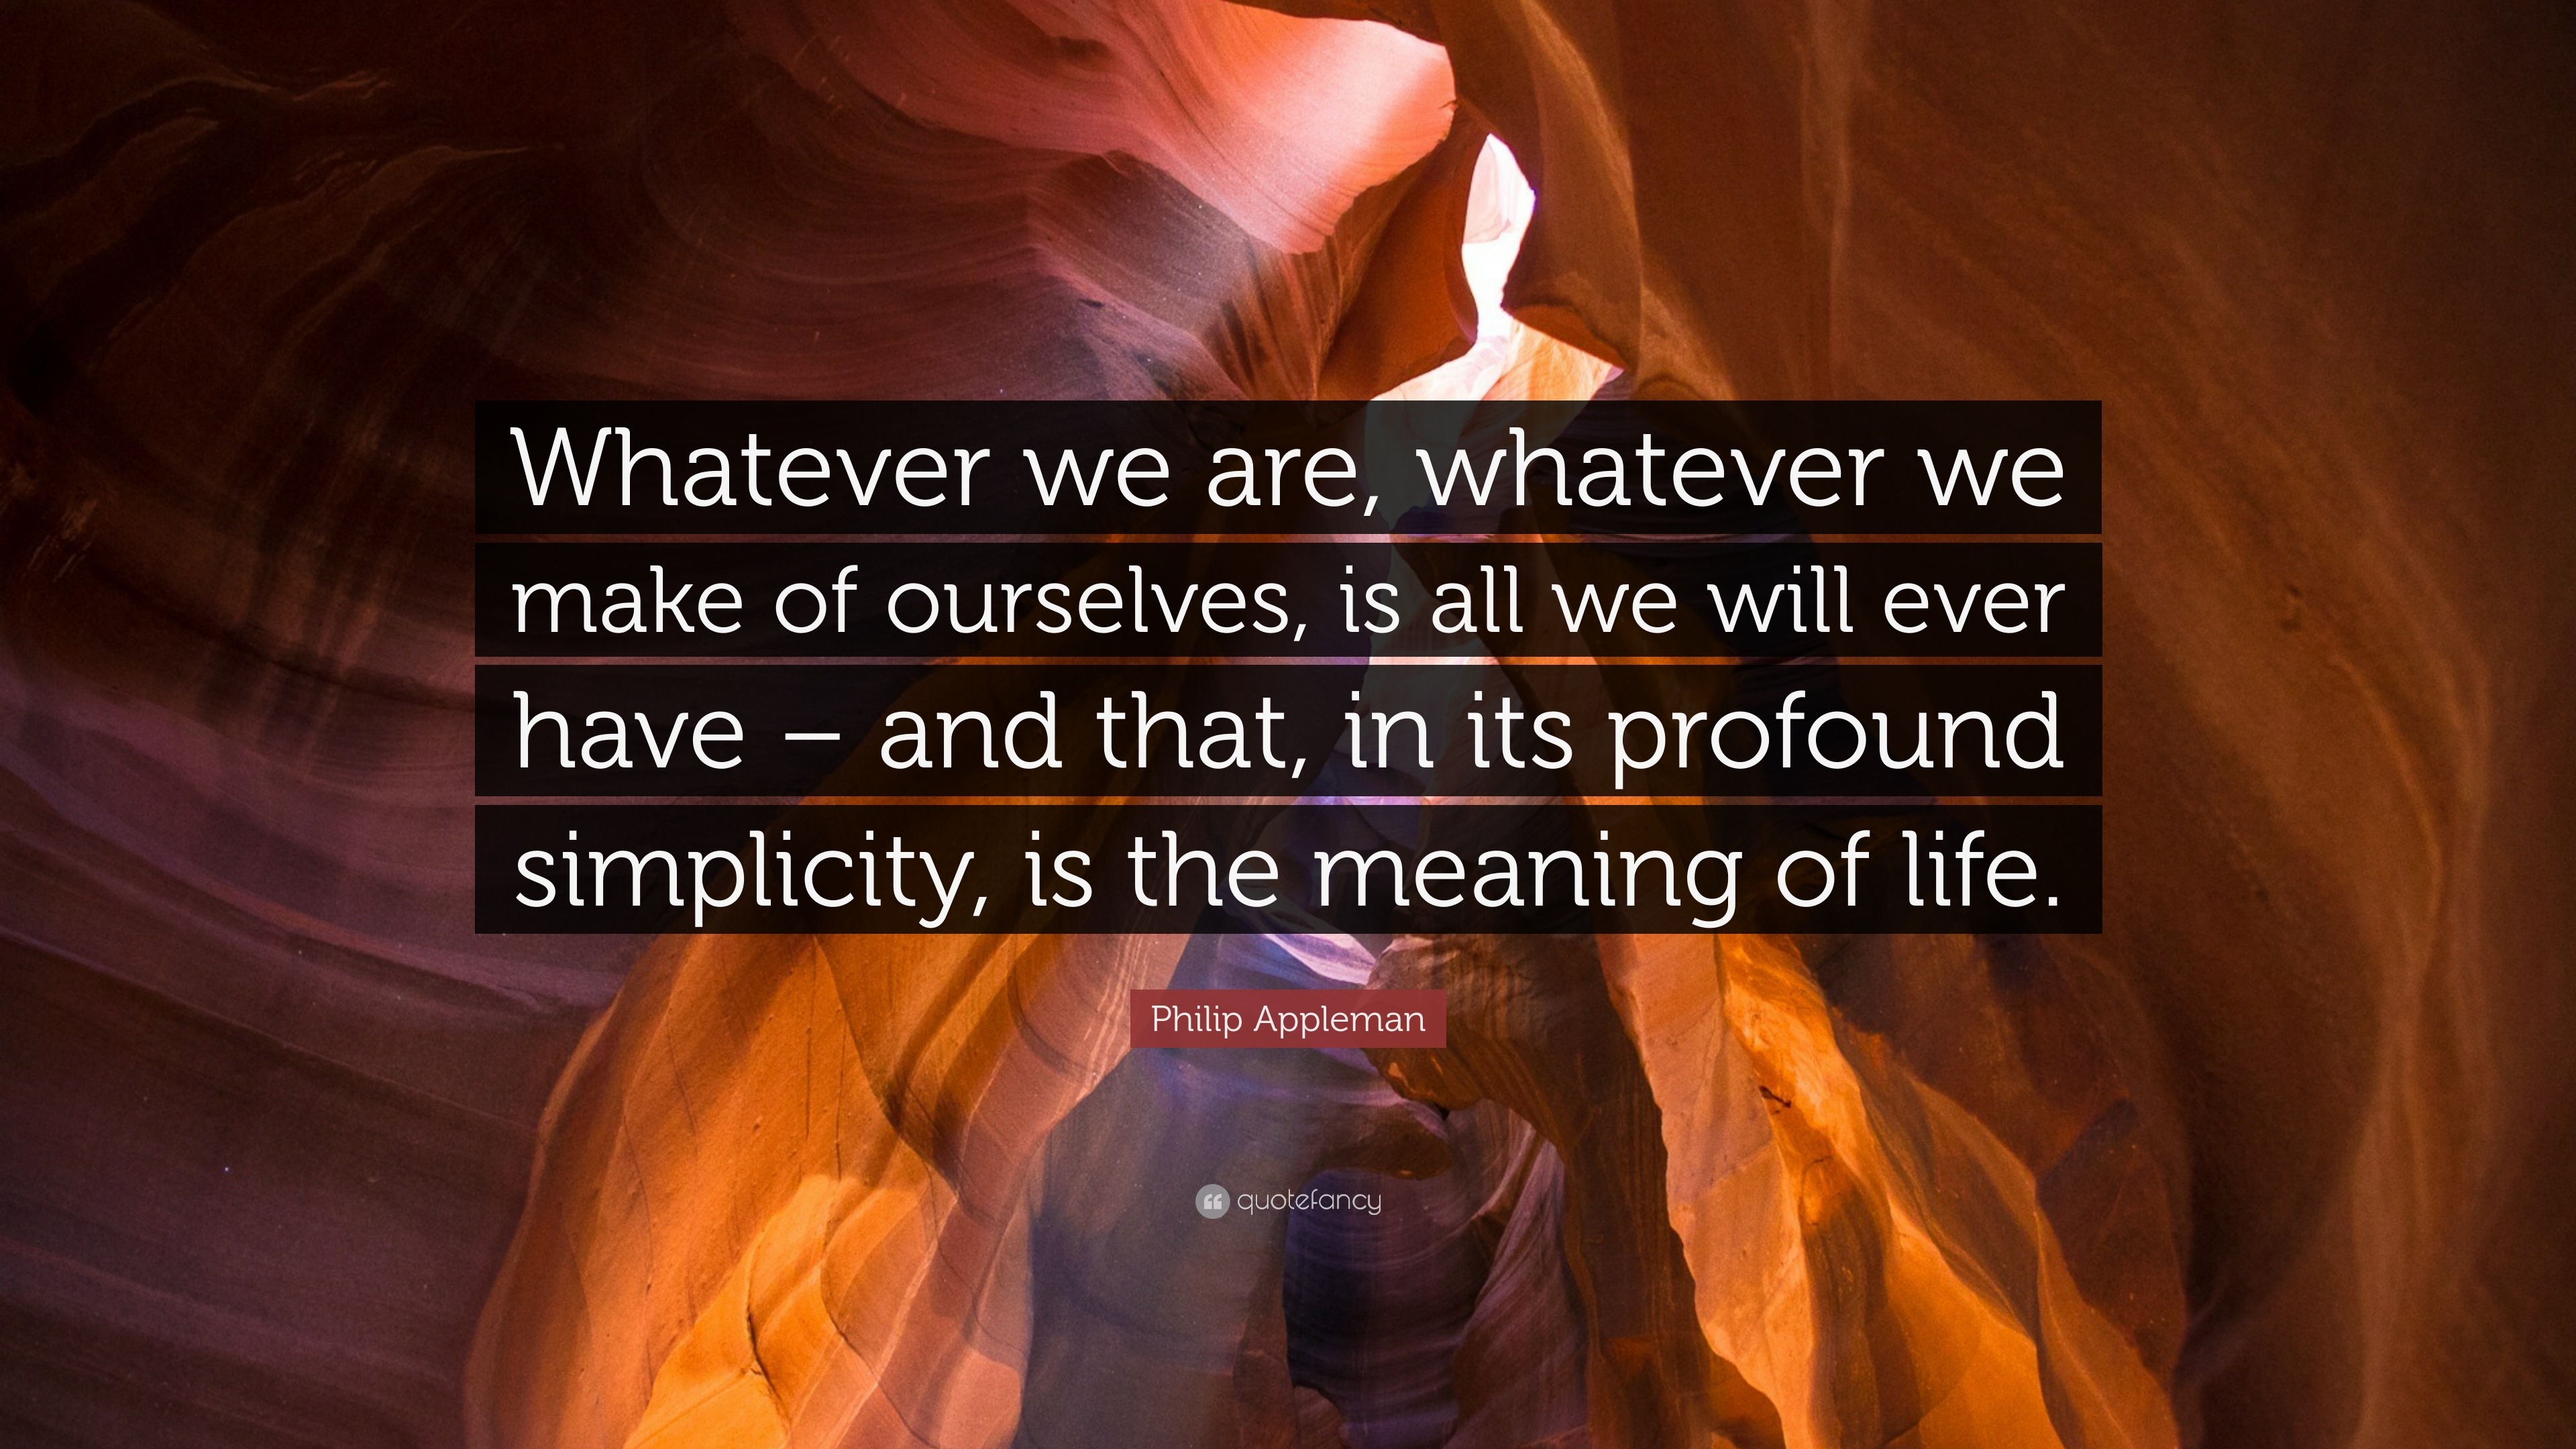 Meaning Life Quotes “Whatever we are whatever we make of ourselves